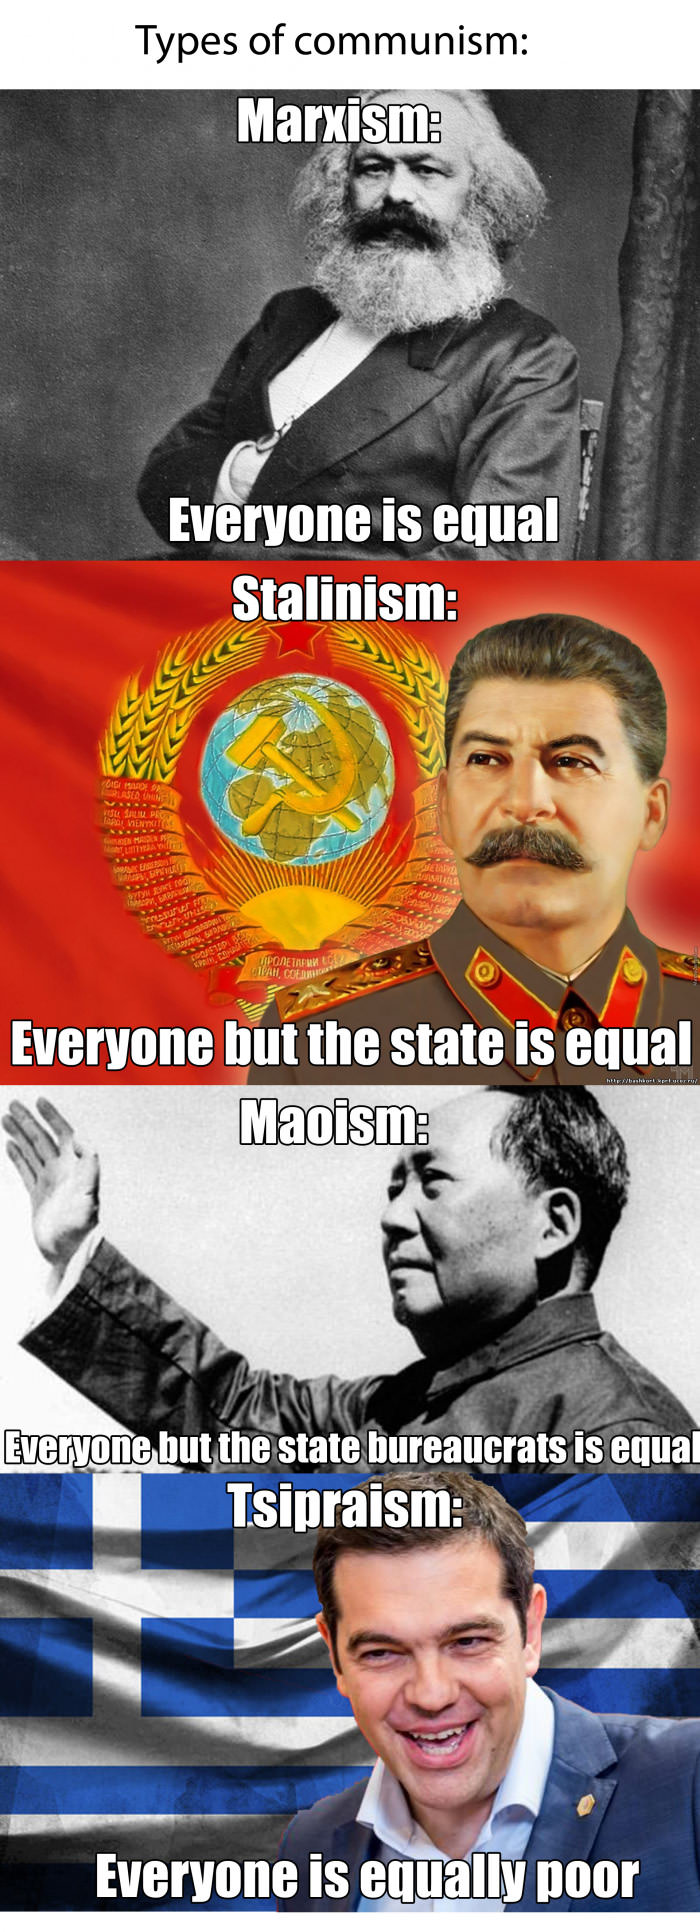 the various types of communism